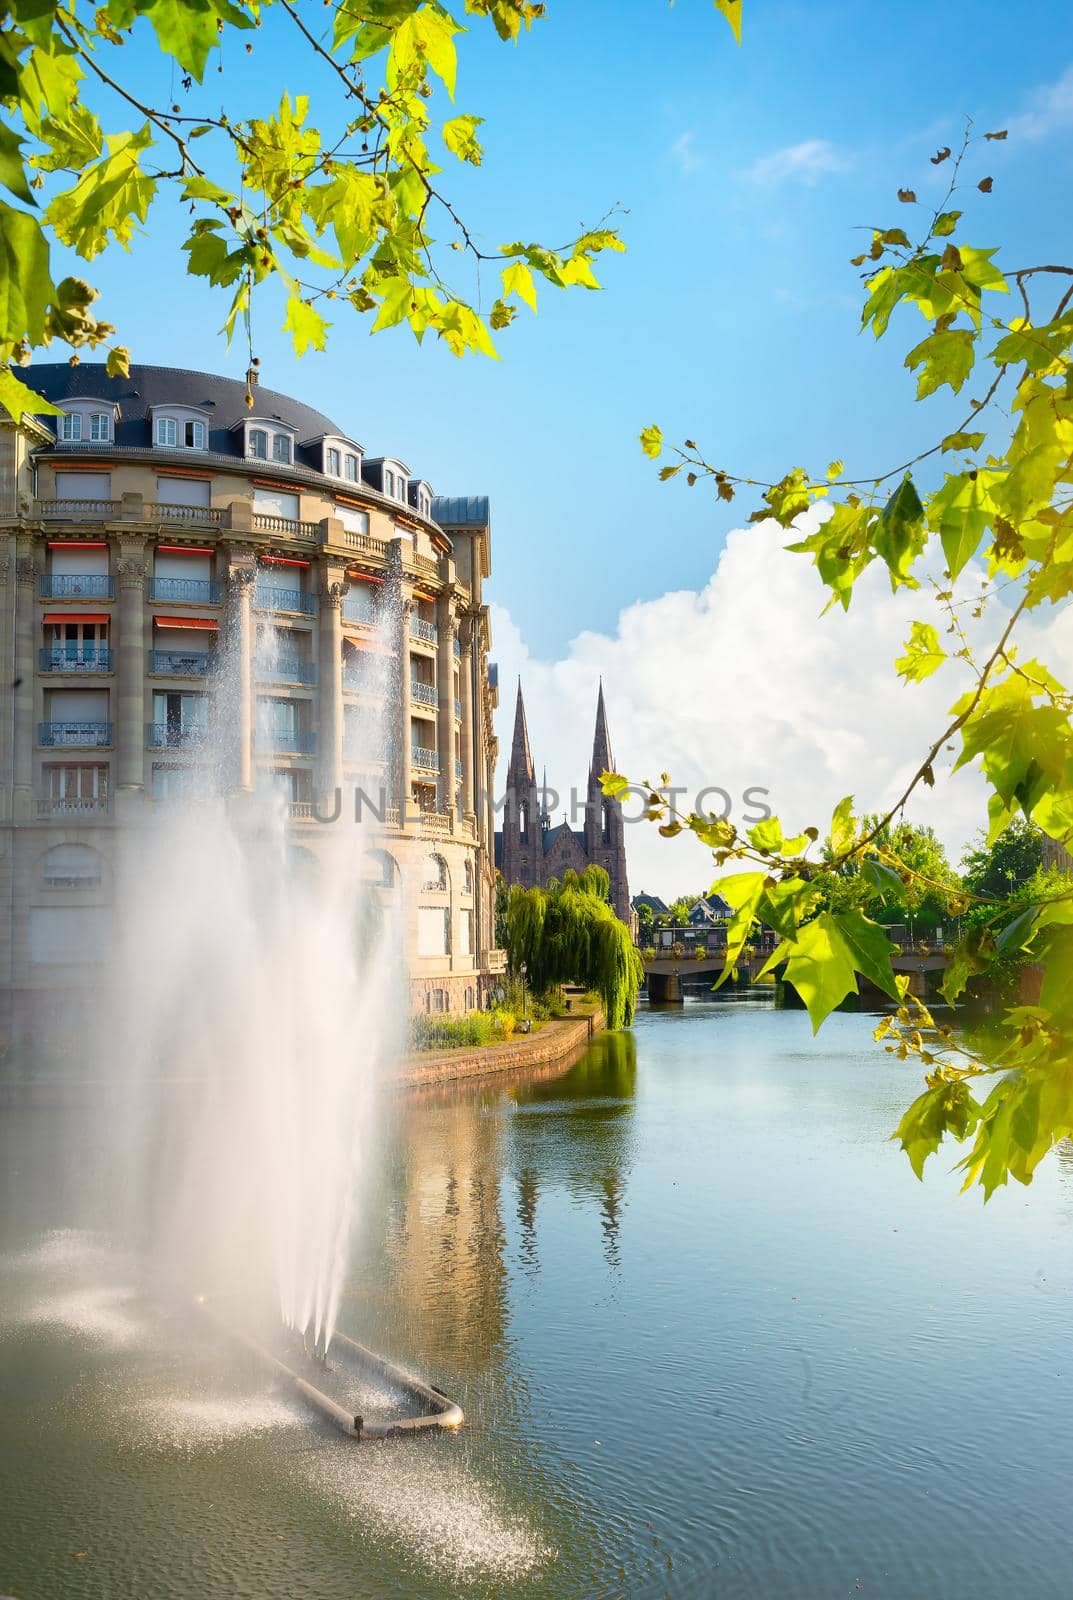 Fountain in strasbourg by Givaga